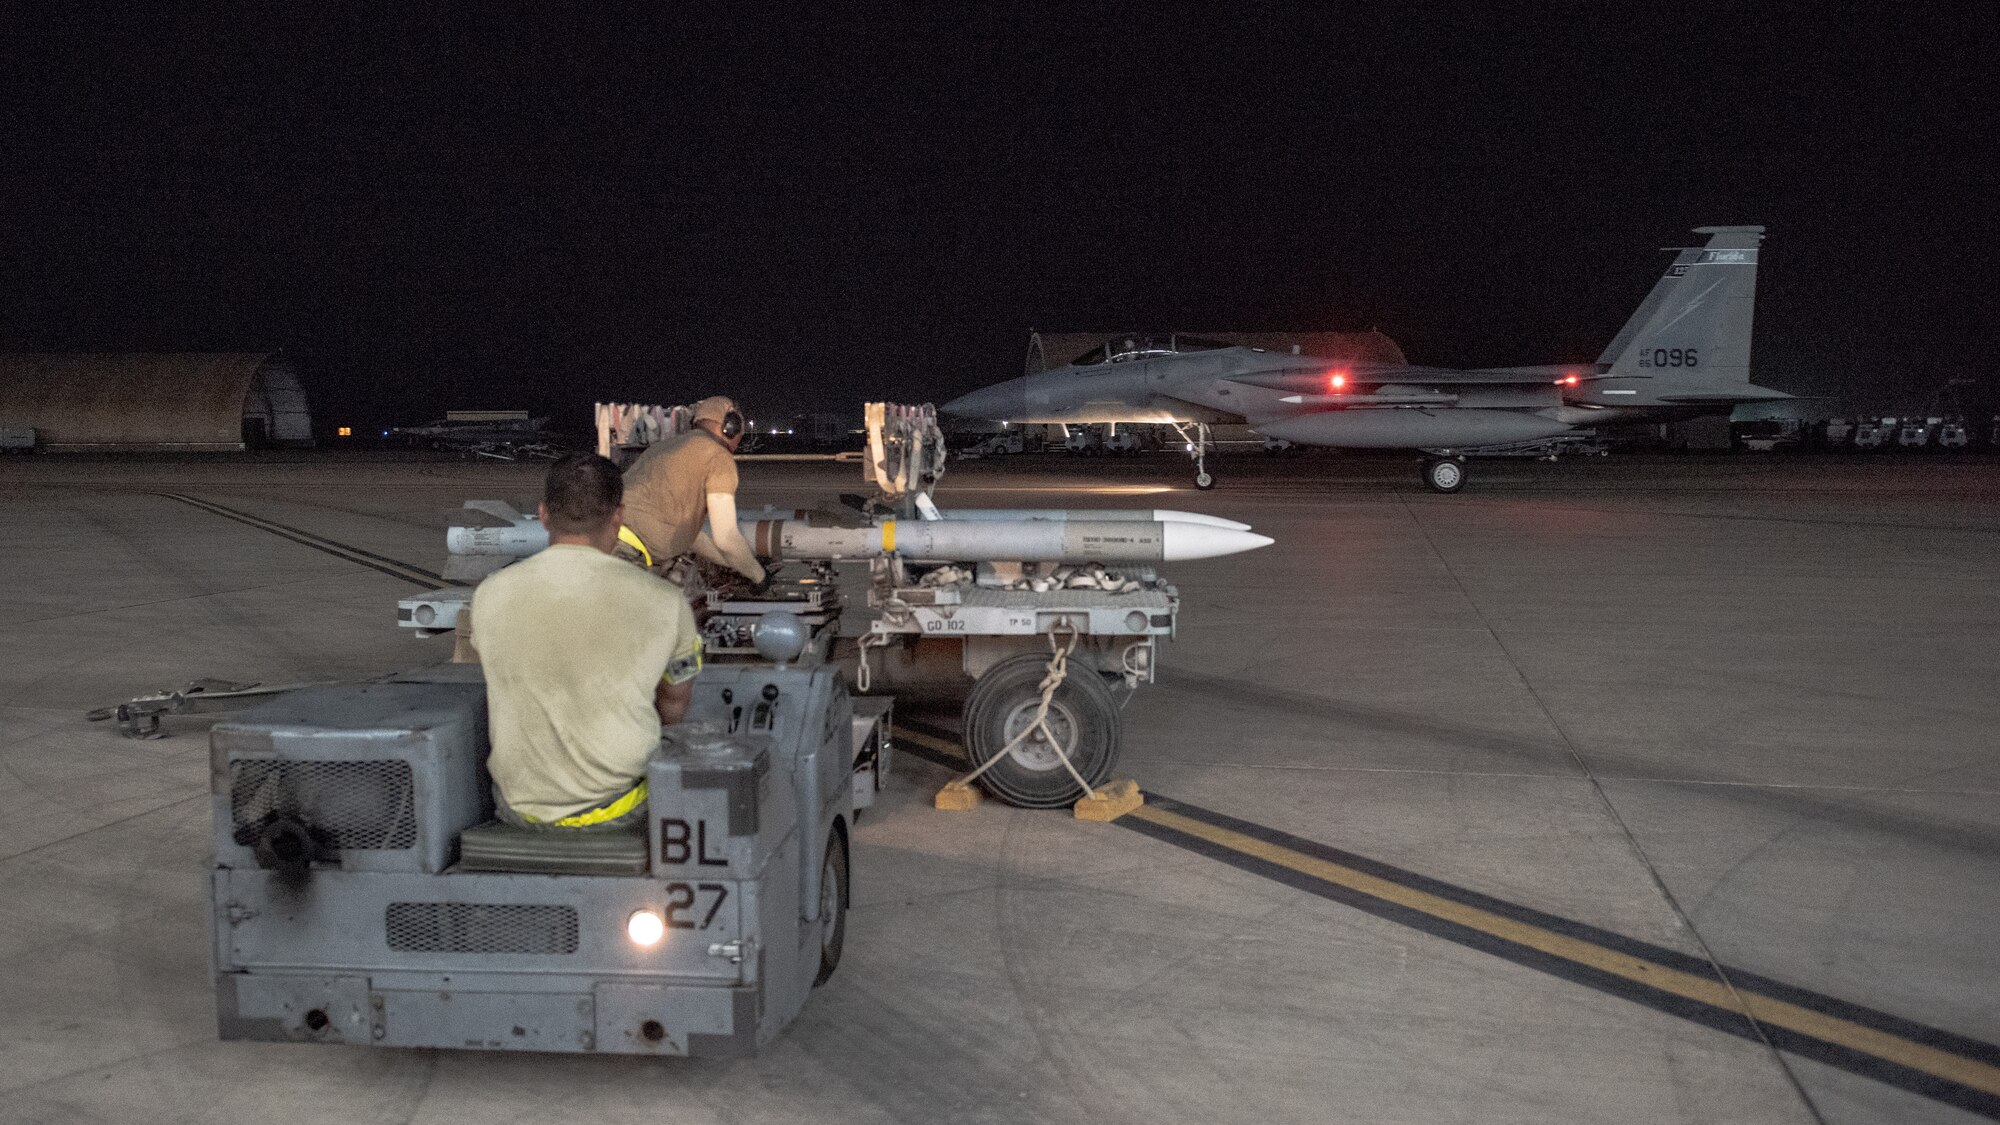 An F-15E Strike Eagle weapons load crew team prepares to lift an AIM-120D to attach to a pylon July 15, 2019, at Al Dhafra Air Base, United Arab Emirates. The AIM-120D is the latest Advanced Medium-Range Air-to-Air missile (AMRAAM) and features improved navigation, kinematics, lethality and hardware and software updates to enhance its electronic protection capabilities against more capable threats. (U.S. Air Force photo by Staff Sgt. Chris Thornbury)